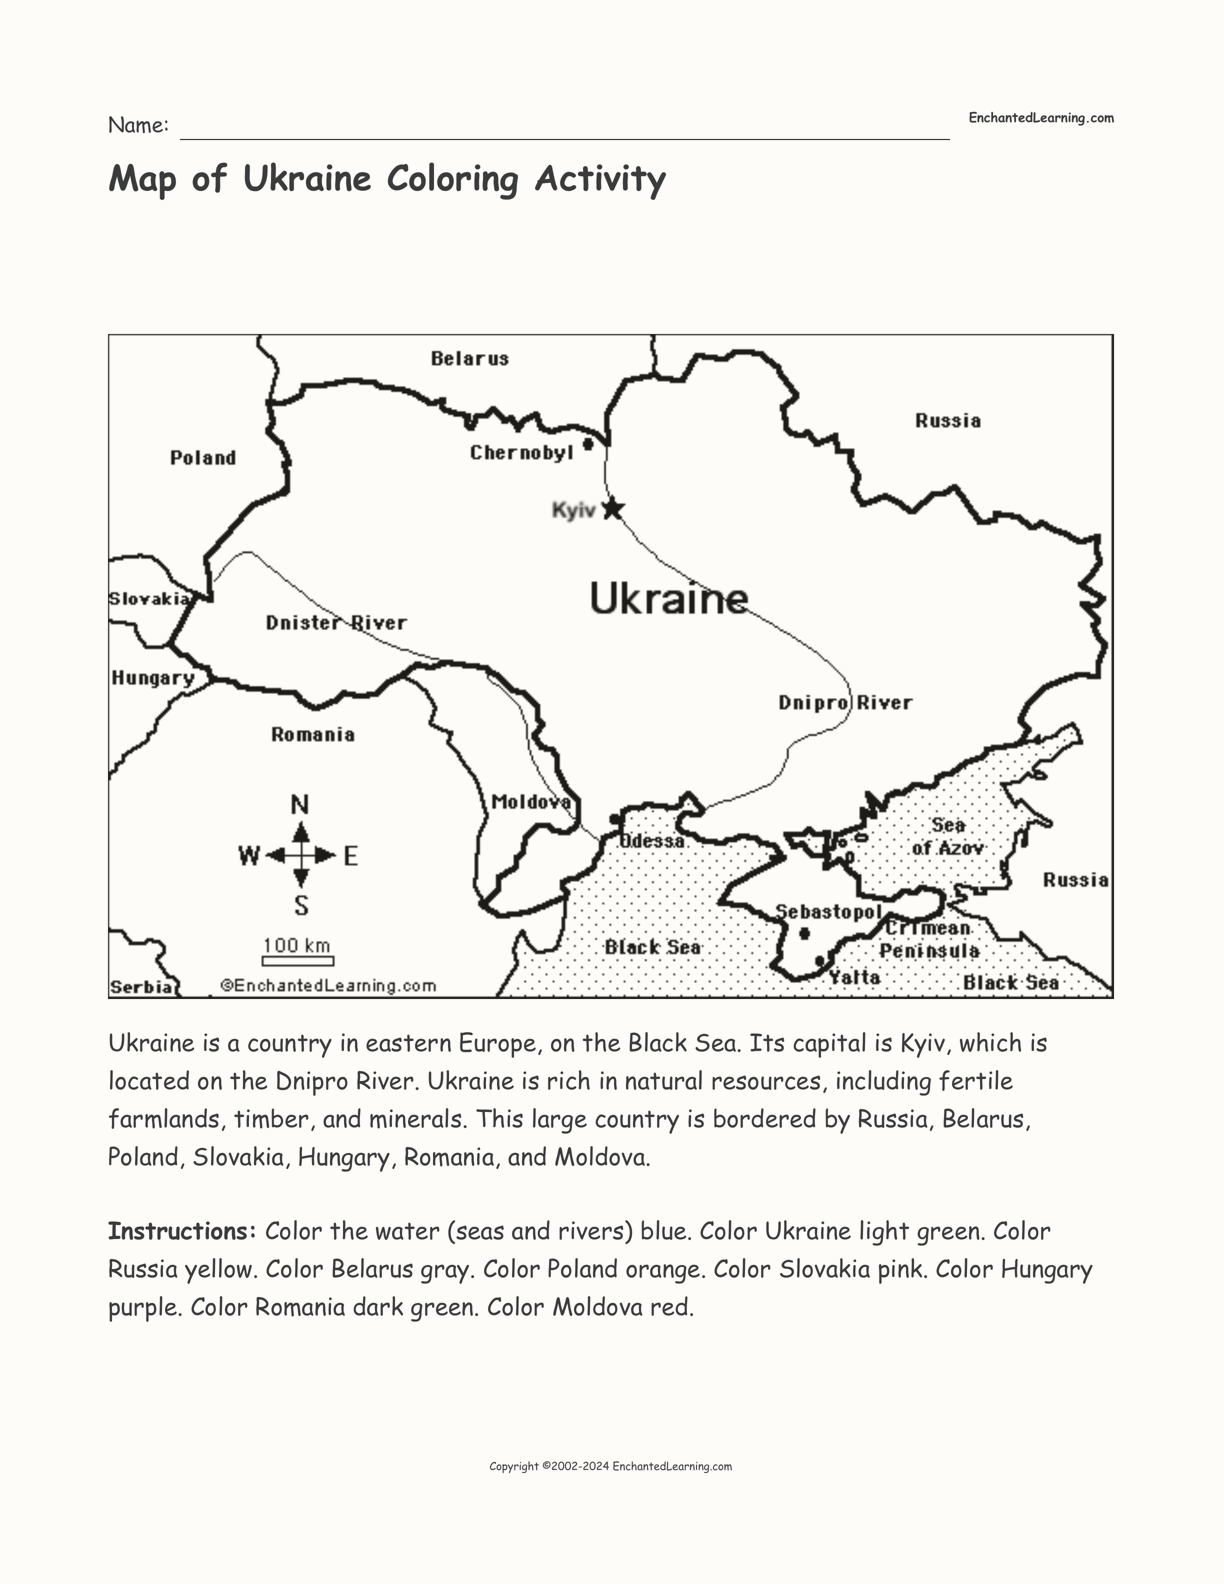 Map of Ukraine Coloring Activity interactive worksheet page 1